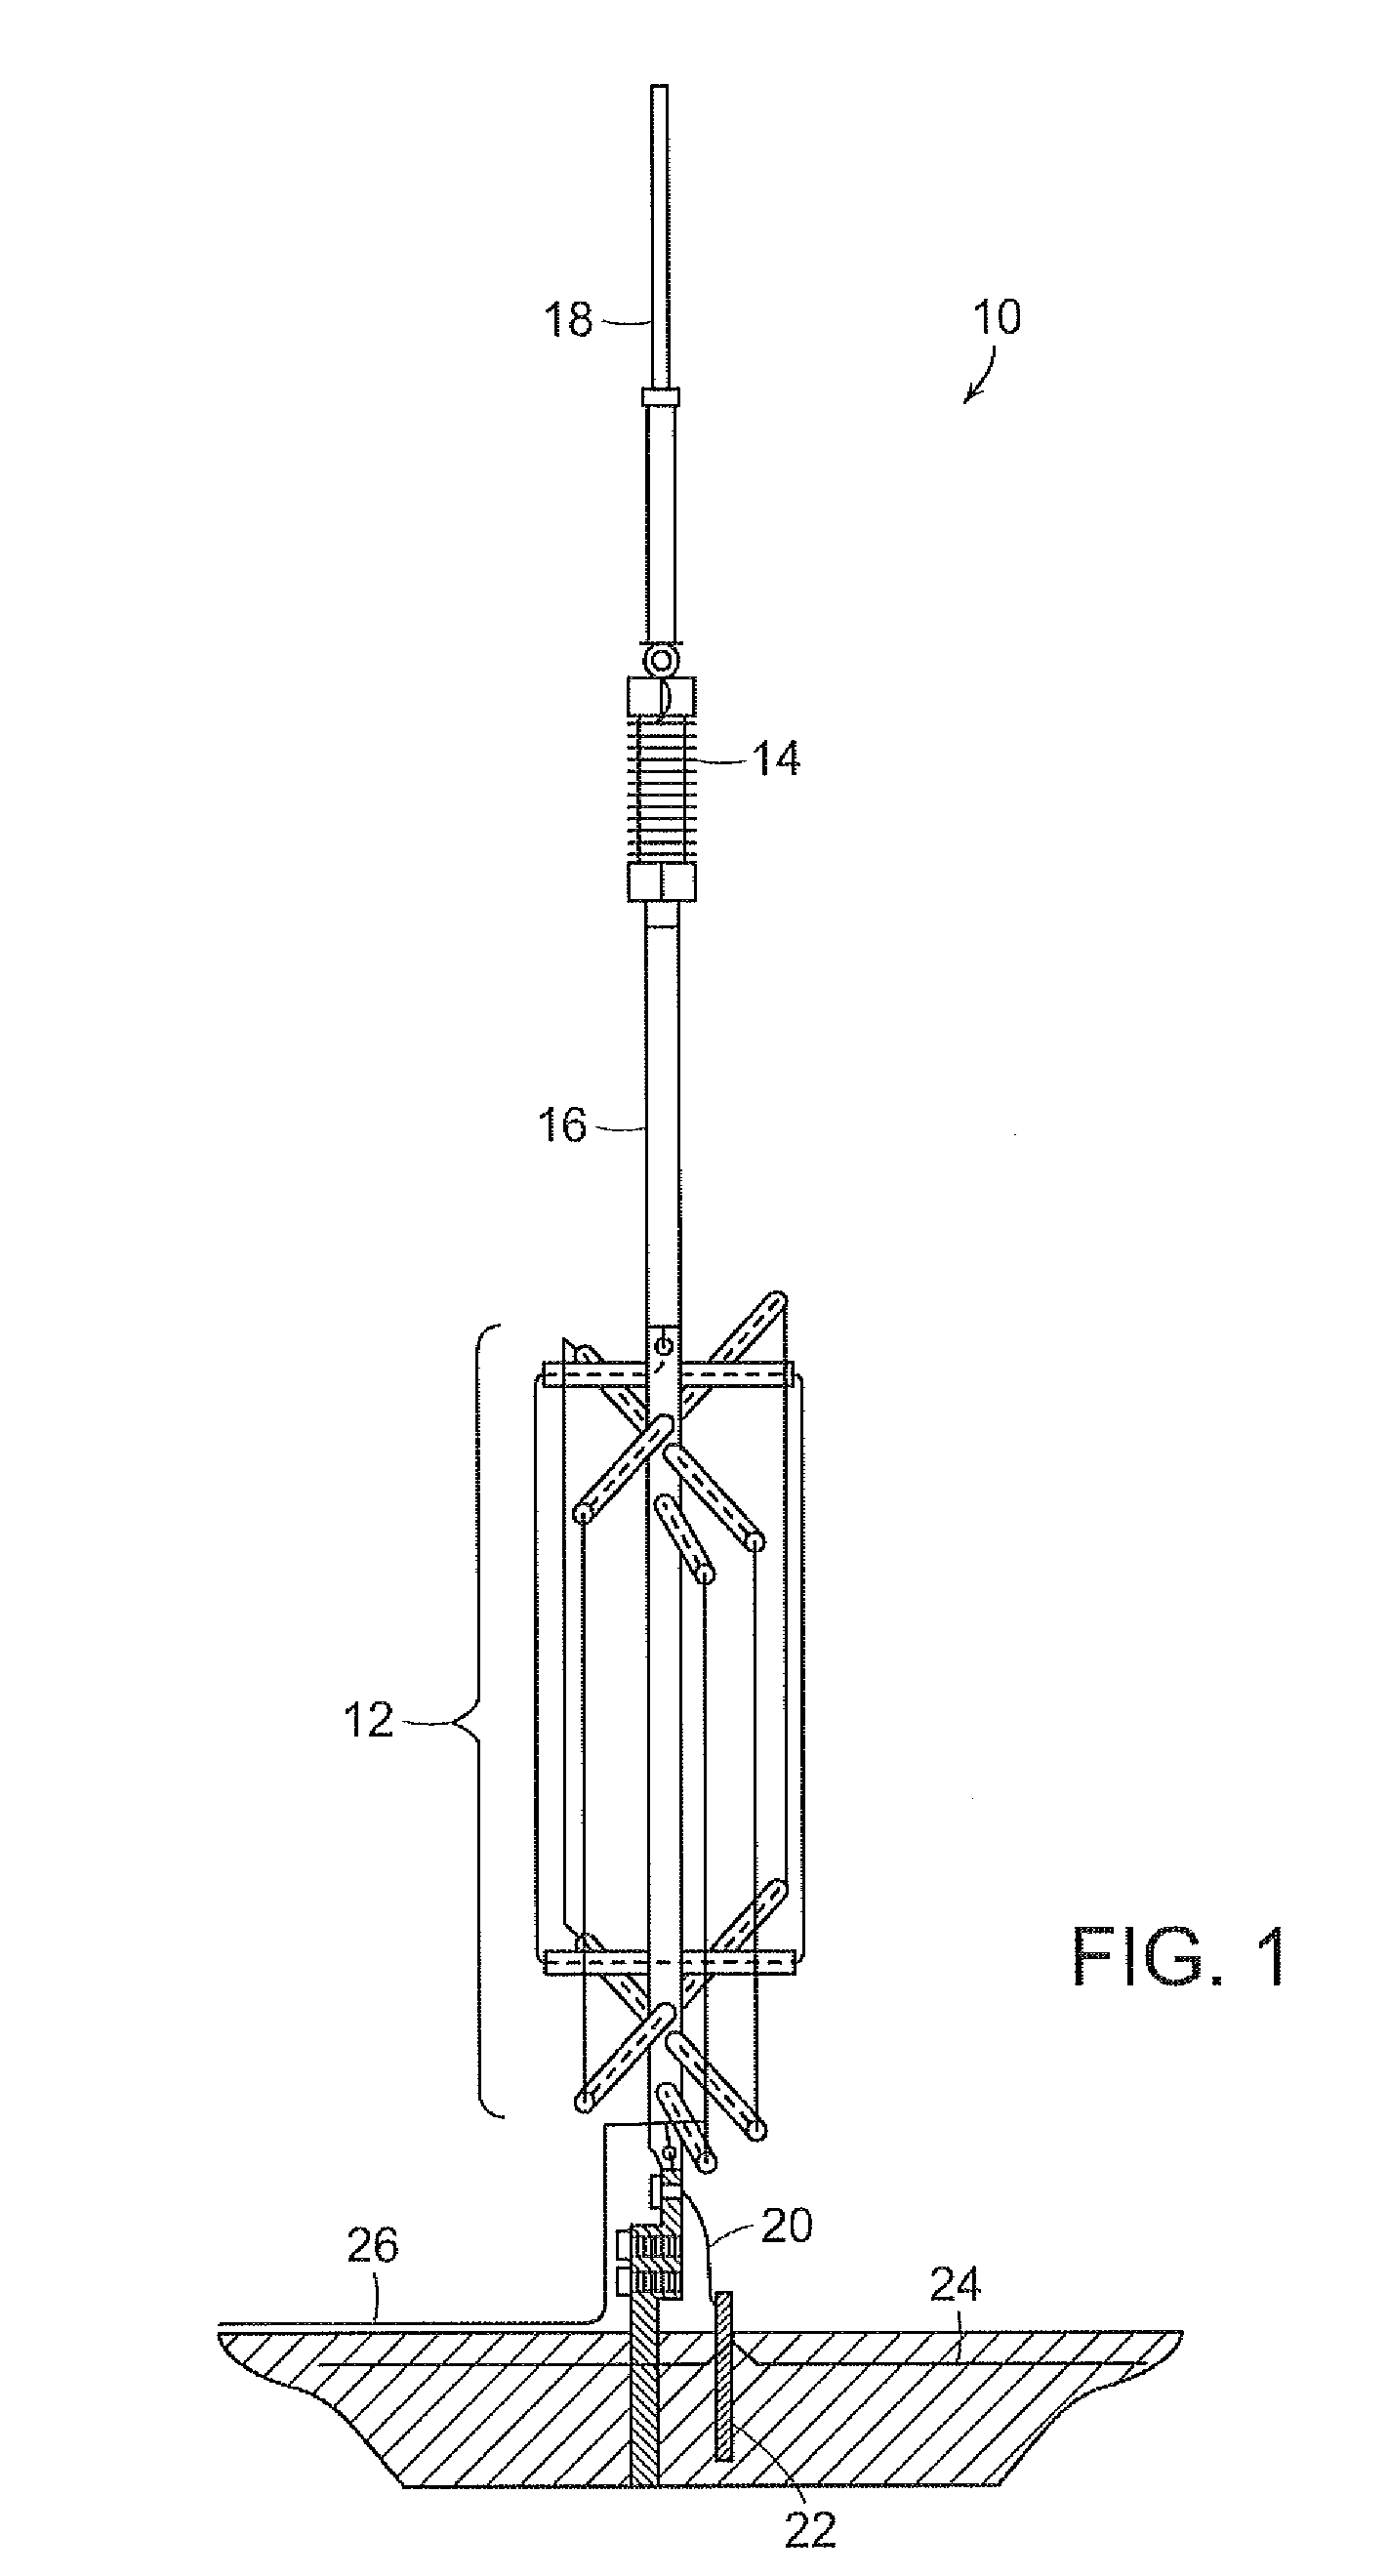 Systems and methods for providing distributed load monopole antenna systems